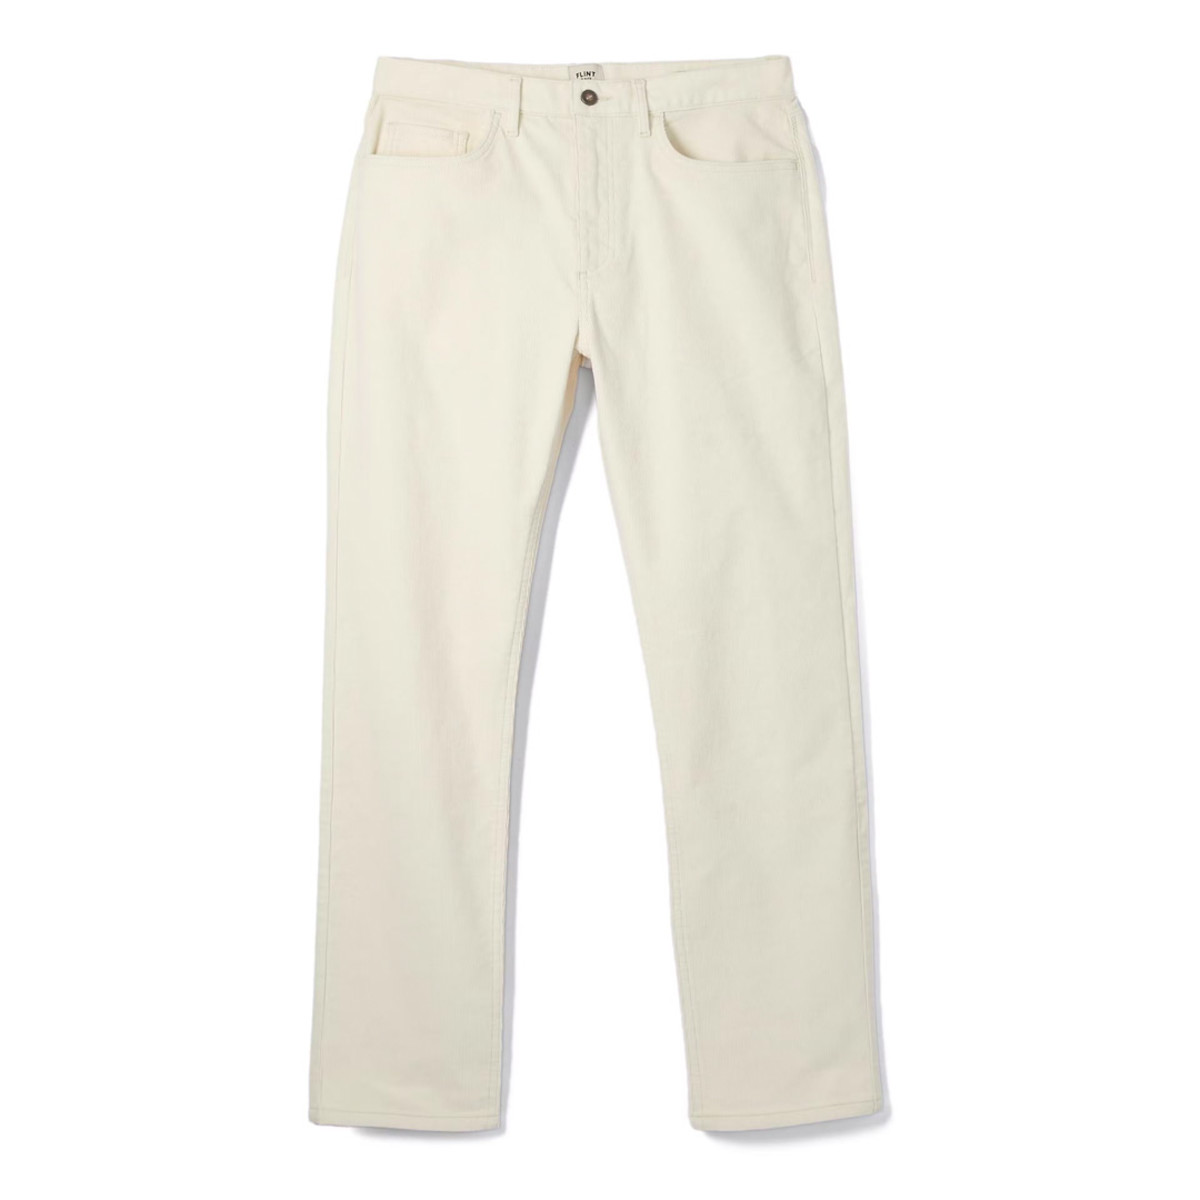 Flint and Tinder’s 365 Corduroy Pants Are Up to 60% Off - Men's Journal